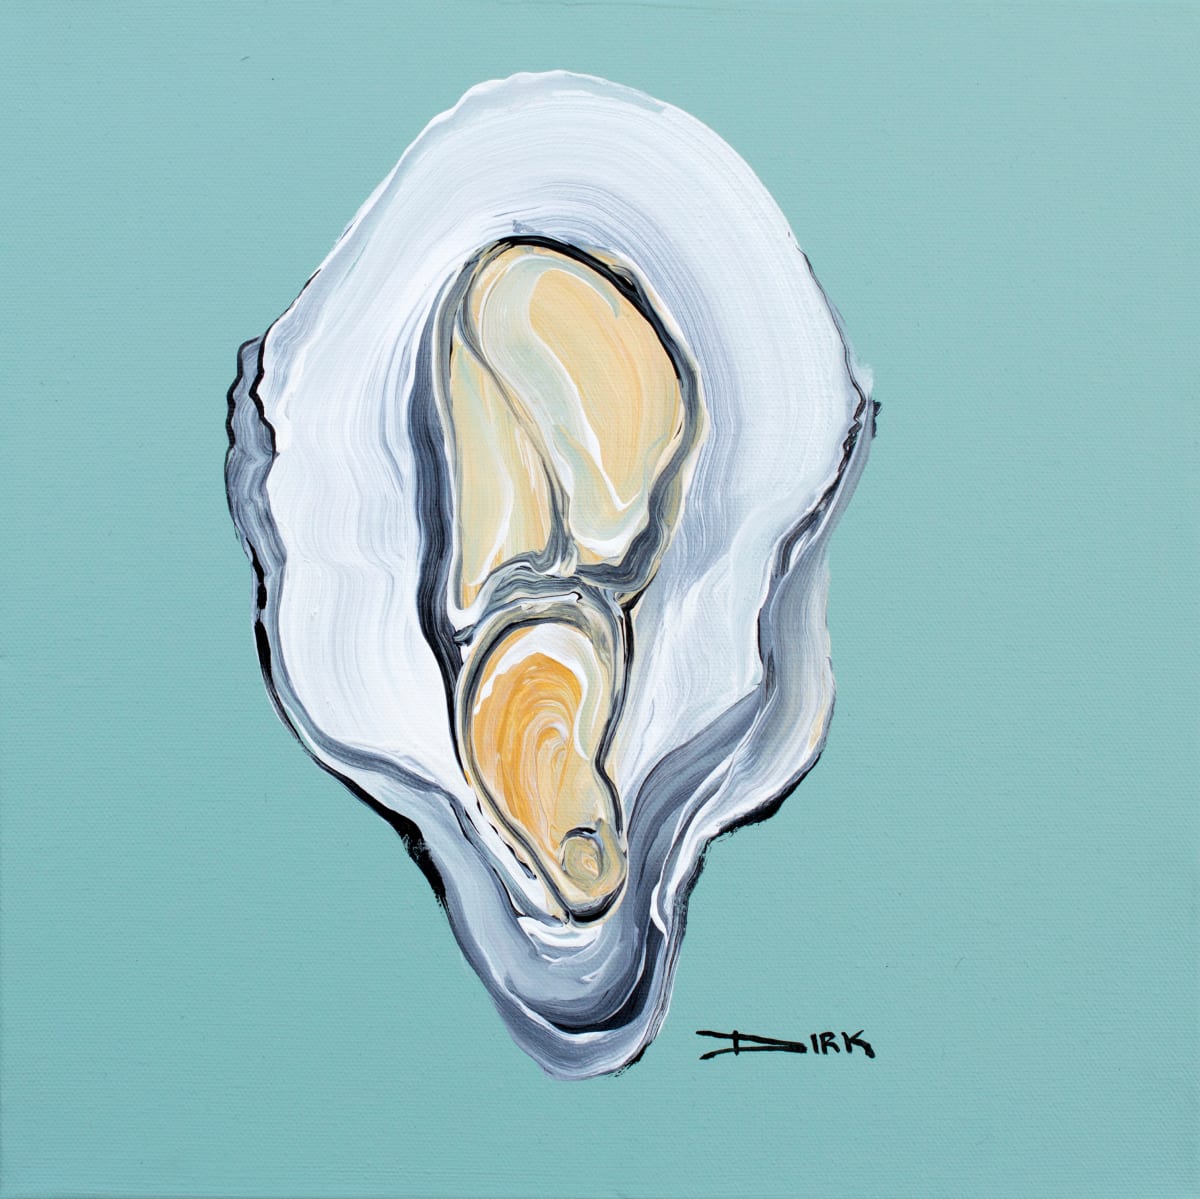 Oyster on canvas #4 by Dirk Guidry 